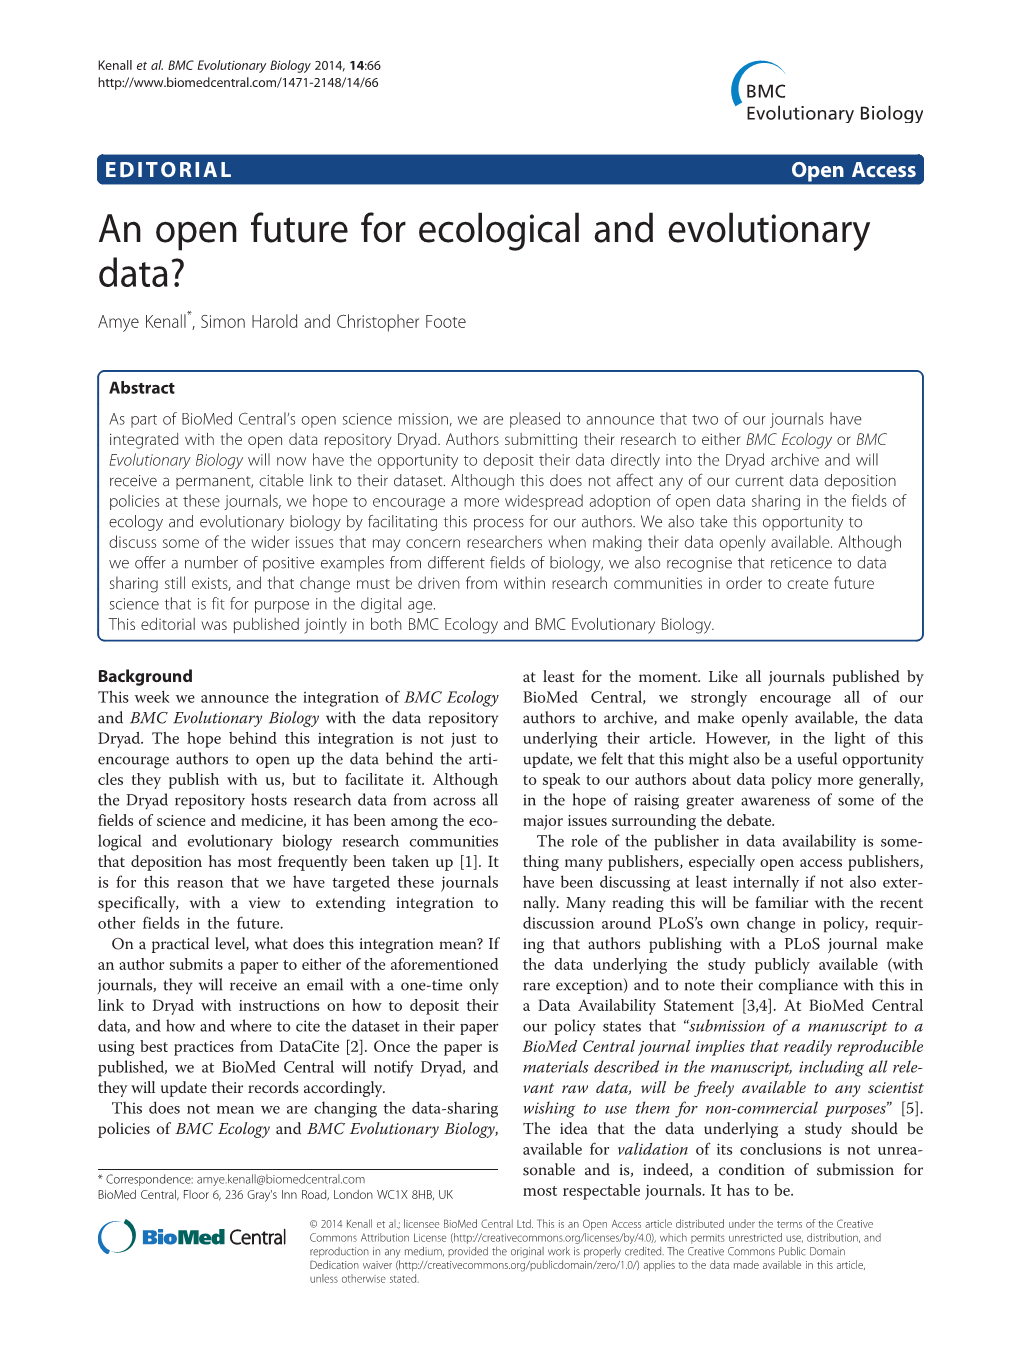 An Open Future for Ecological and Evolutionary Data? Amye Kenall*, Simon Harold and Christopher Foote